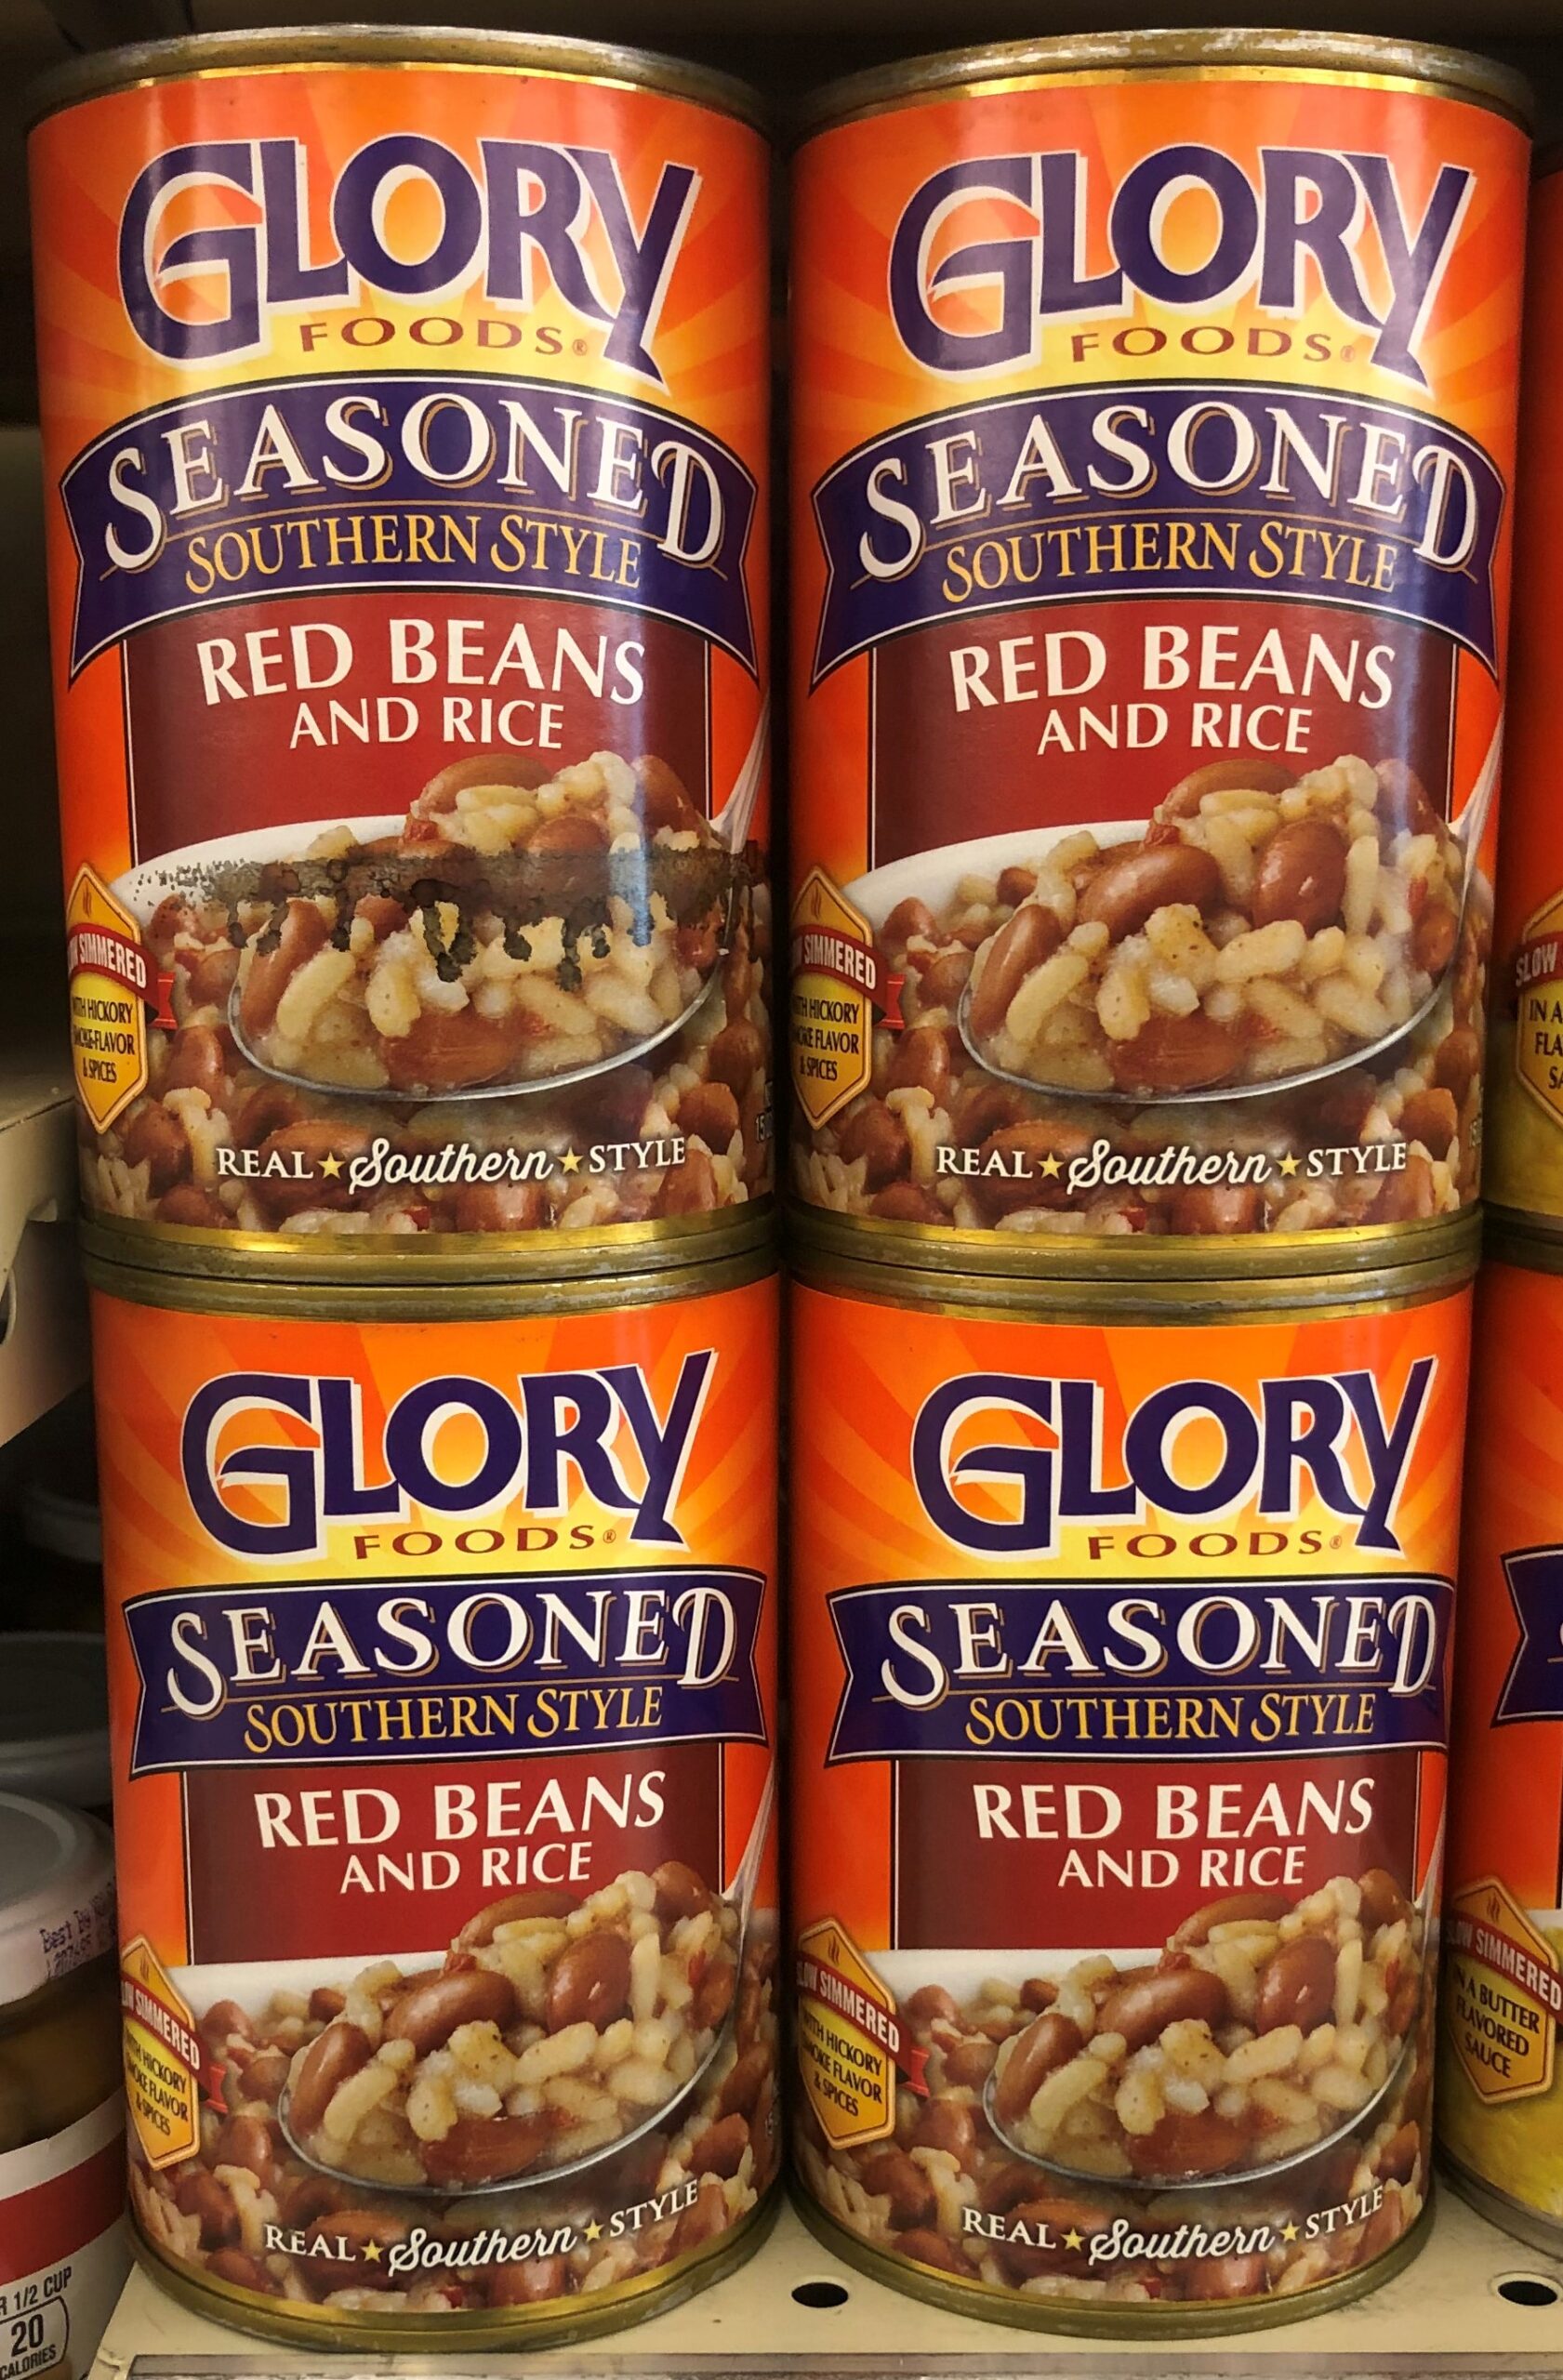 4 Cans Glory Foods Seasoned Southern Style Red Beans And Rice 15 Oz Can Fiber 736393510030 Ebay